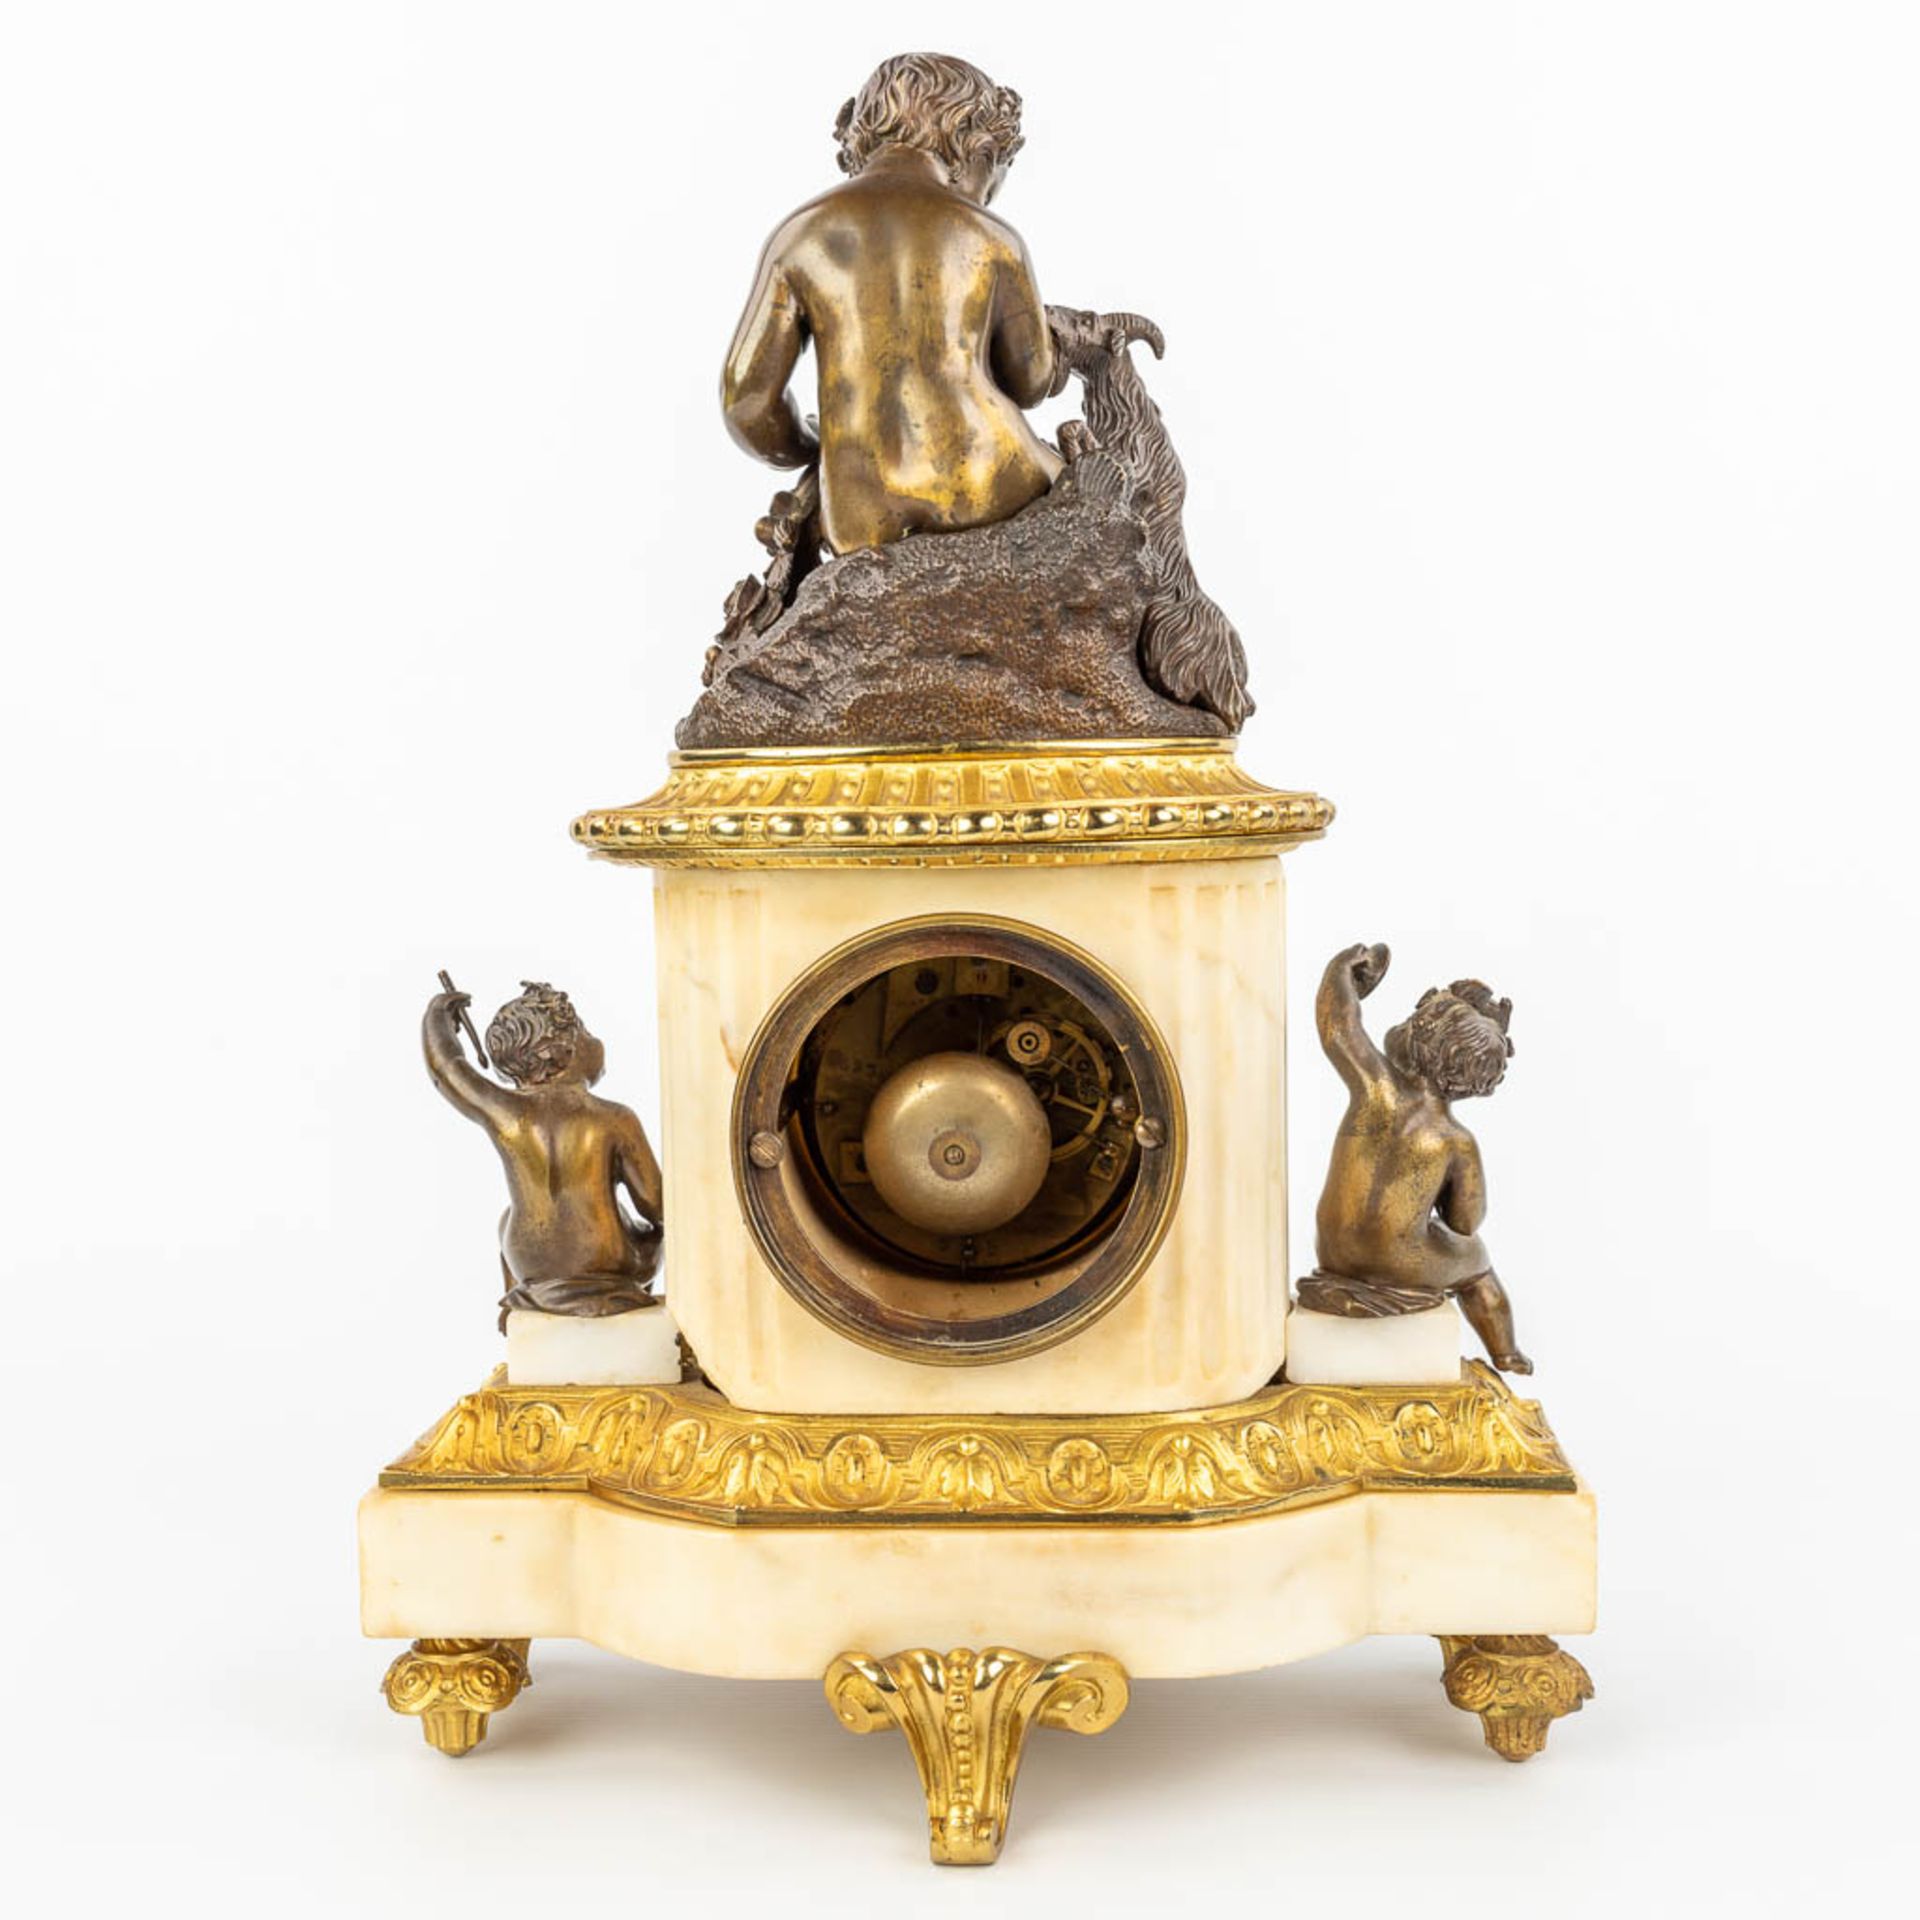 A clock made of marble and decorated with gilt and patinated bronze in Louis XVI style. (H:42cm) - Image 5 of 12